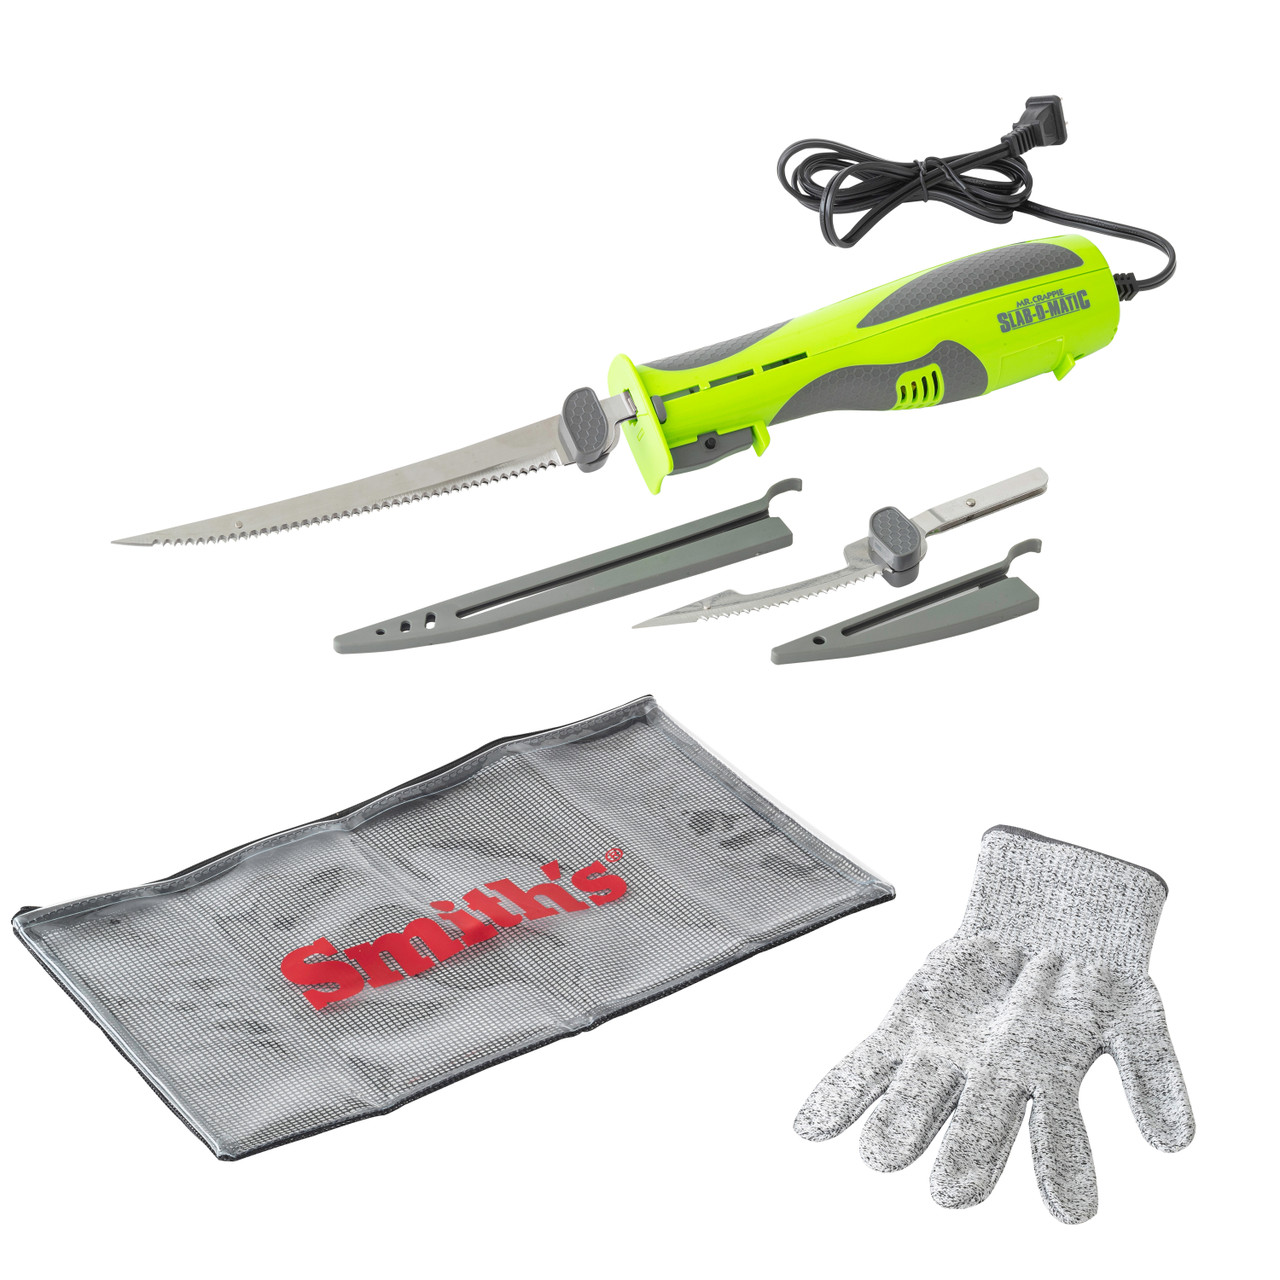 Slab-O-Matic Electric Knife - Smith's Consumer Products